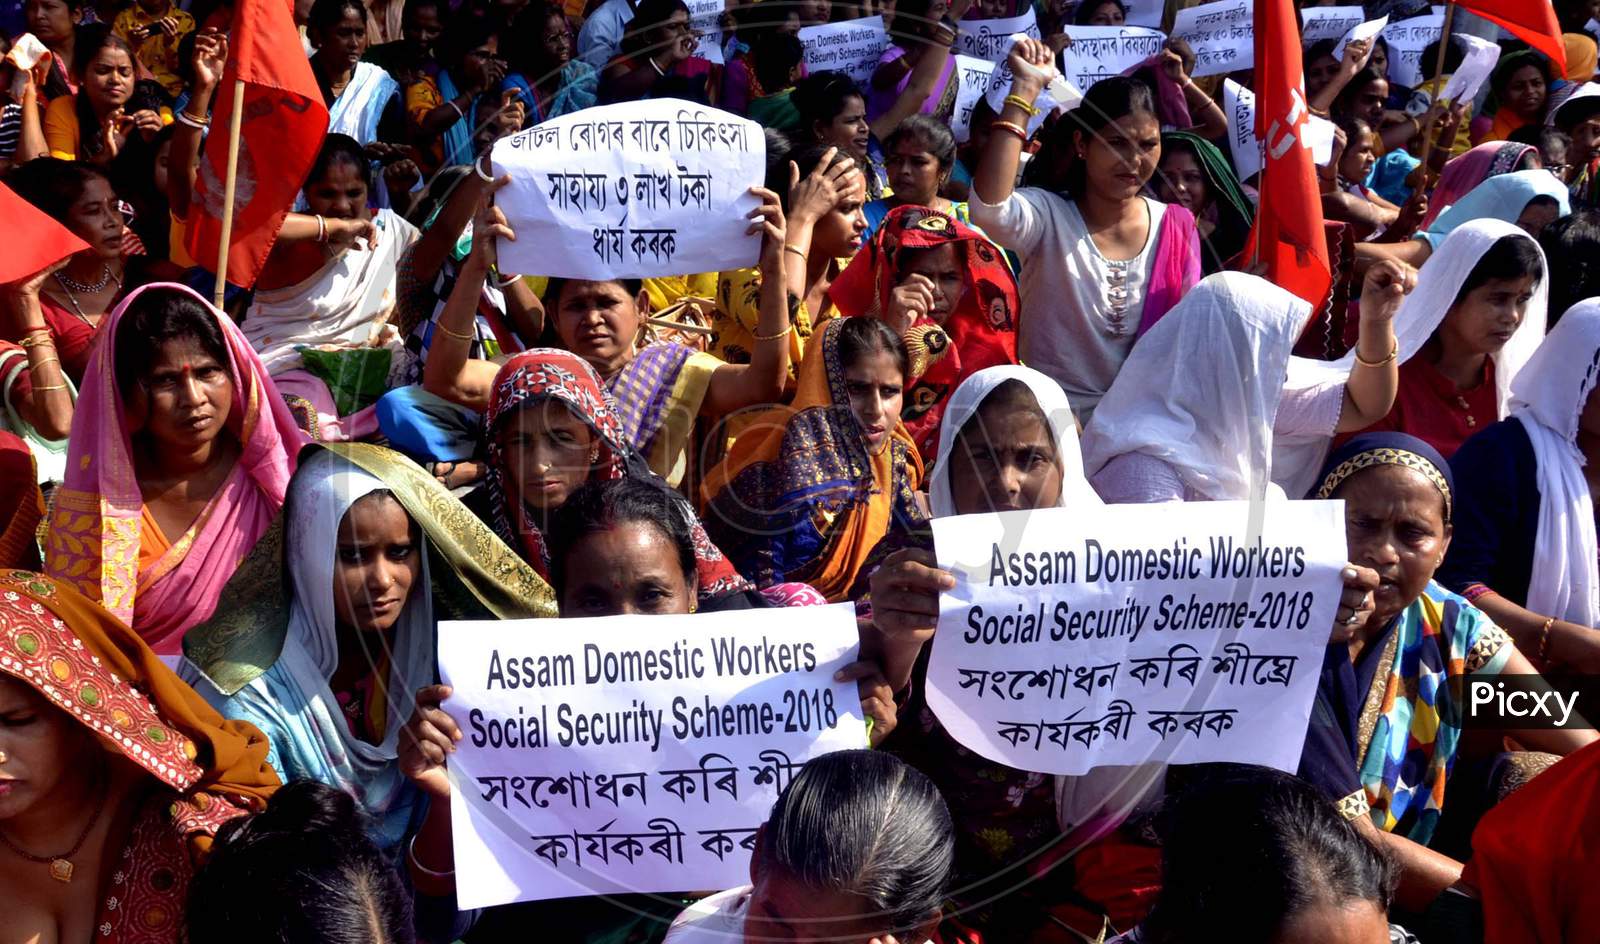 Members of All Guwahati Domestic Worker Union staging a protest